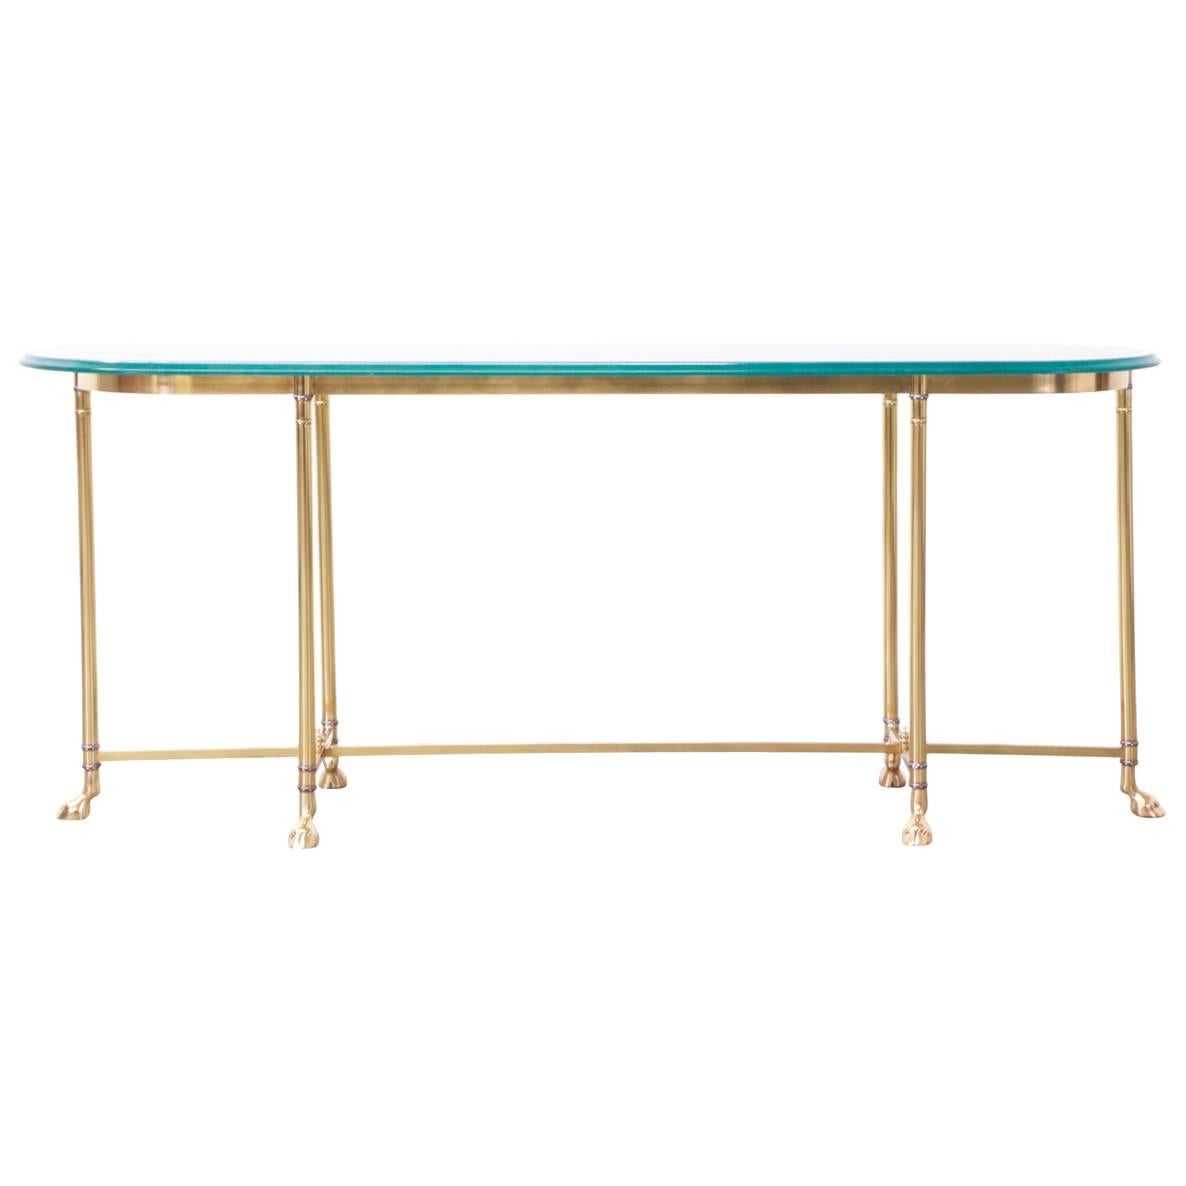 Vintage Brass Hoof Foot Console Table with Glass Top